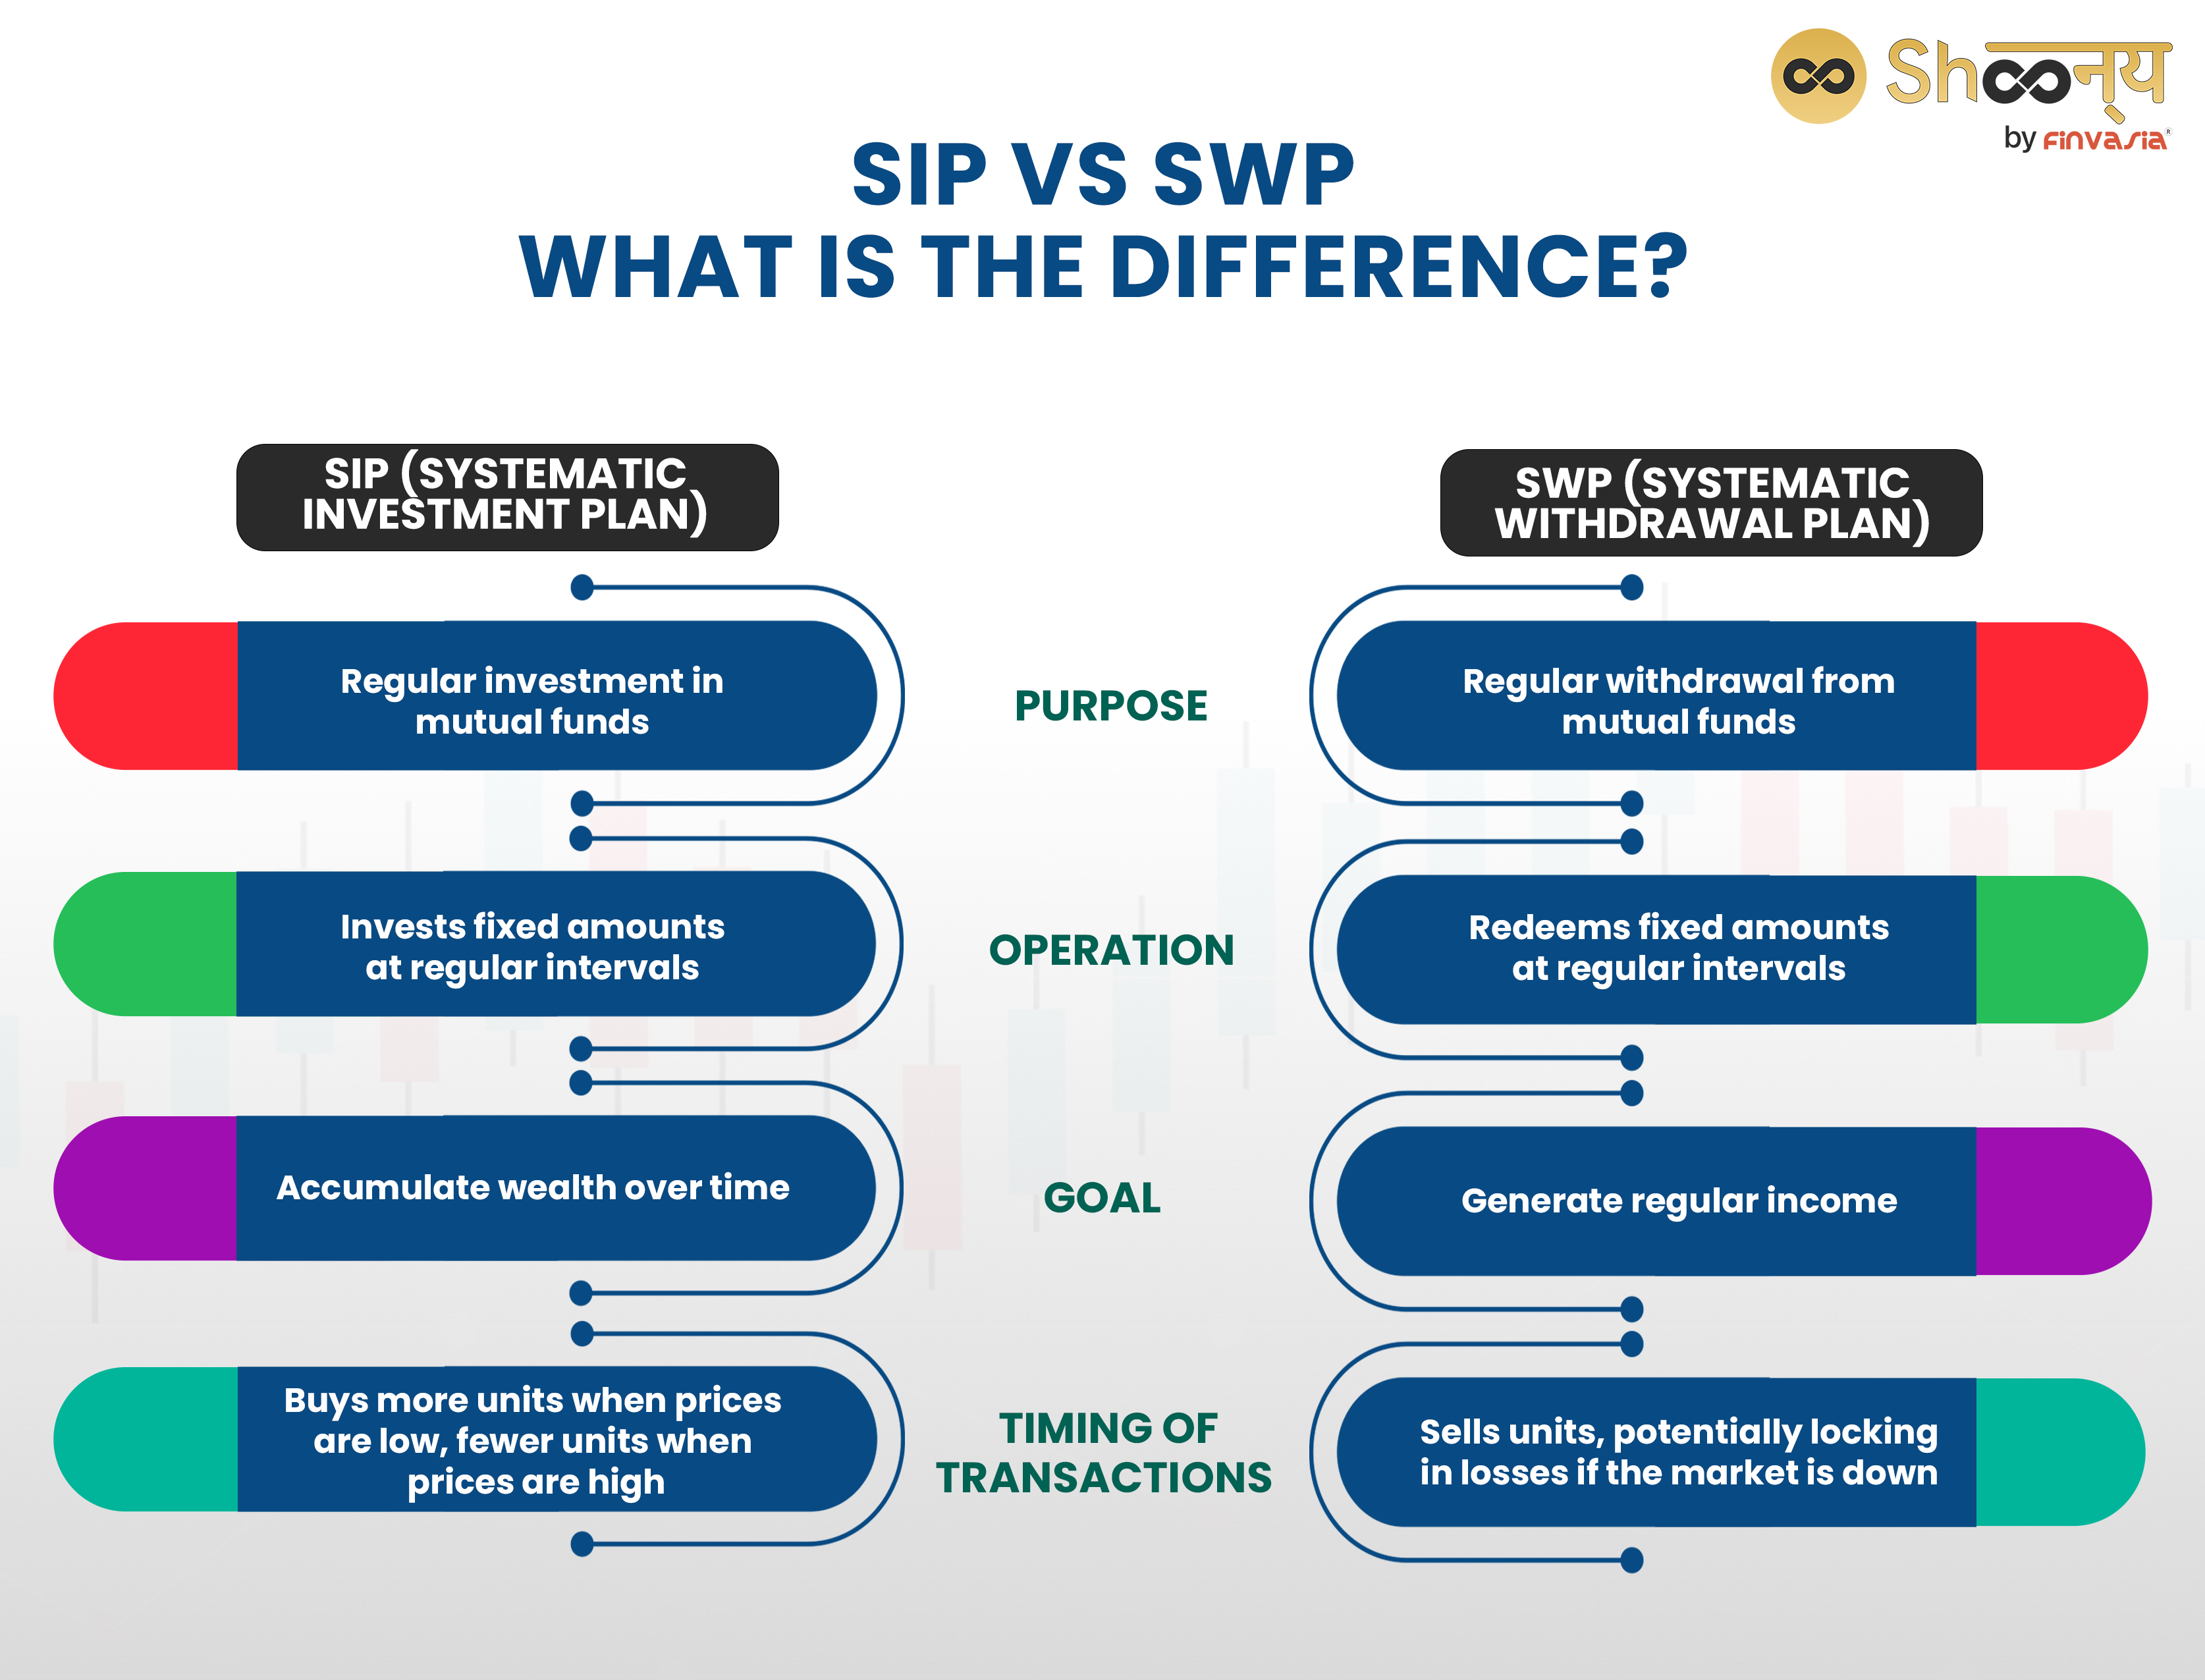 SIP vs SWP: What is the difference?